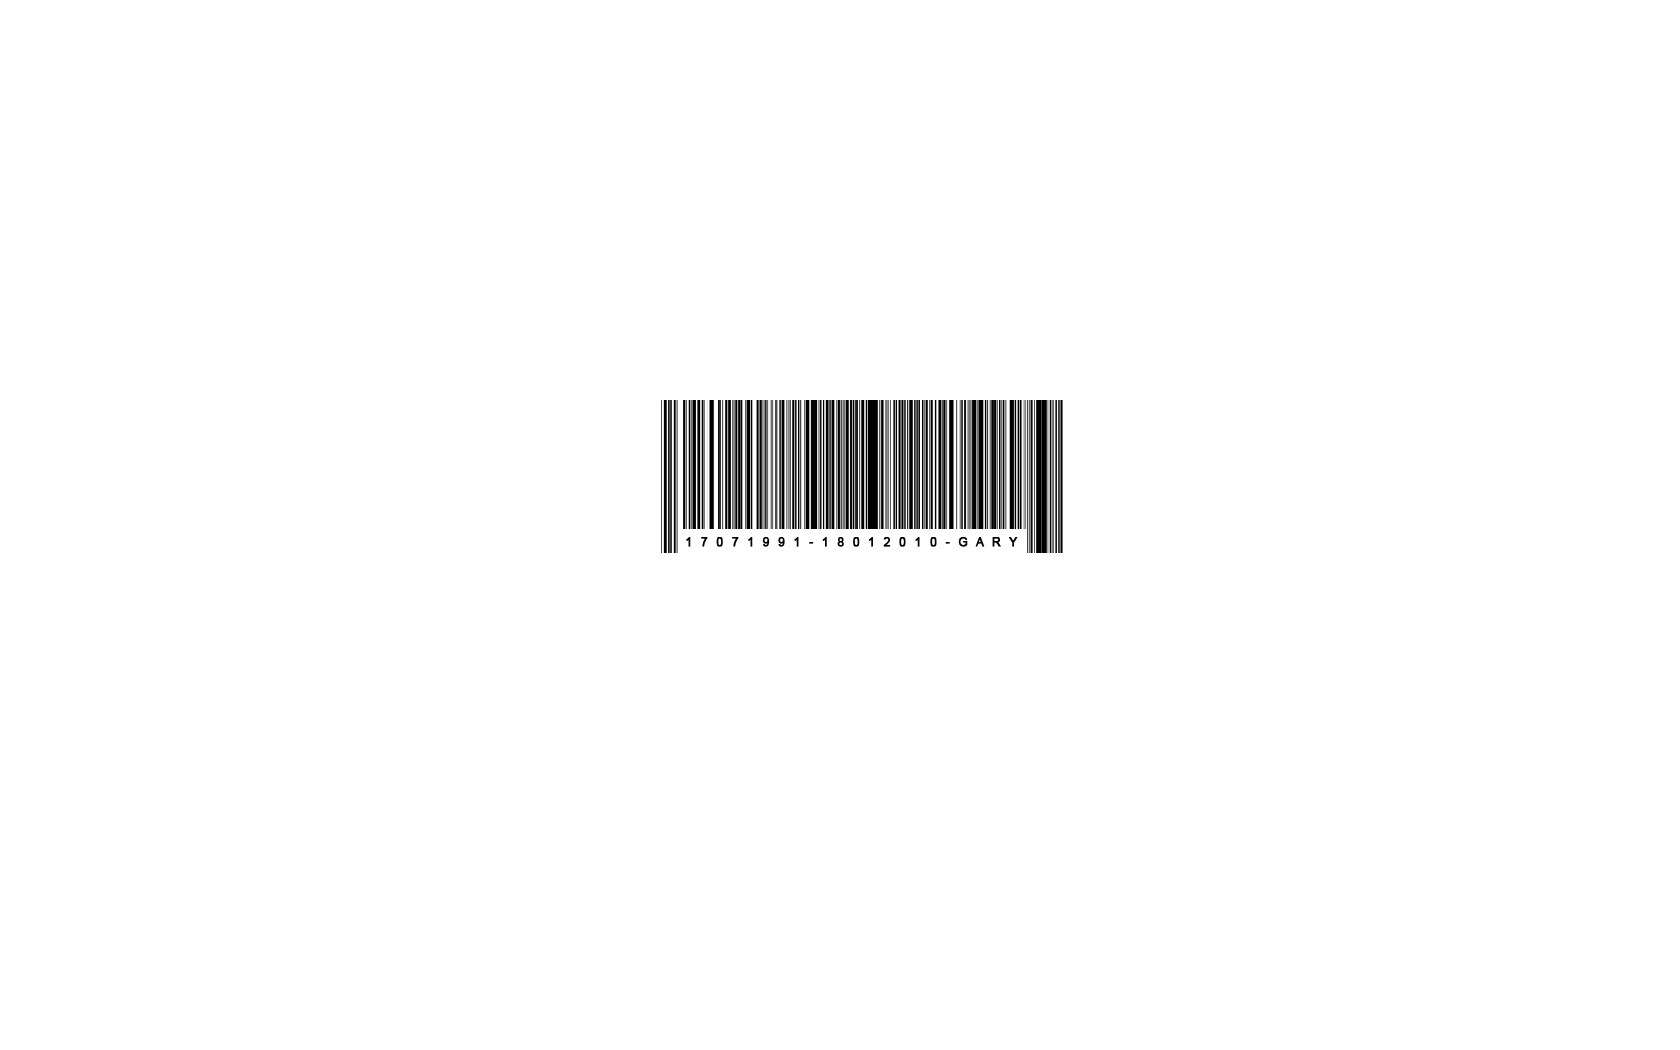 Barcode Wallpapers